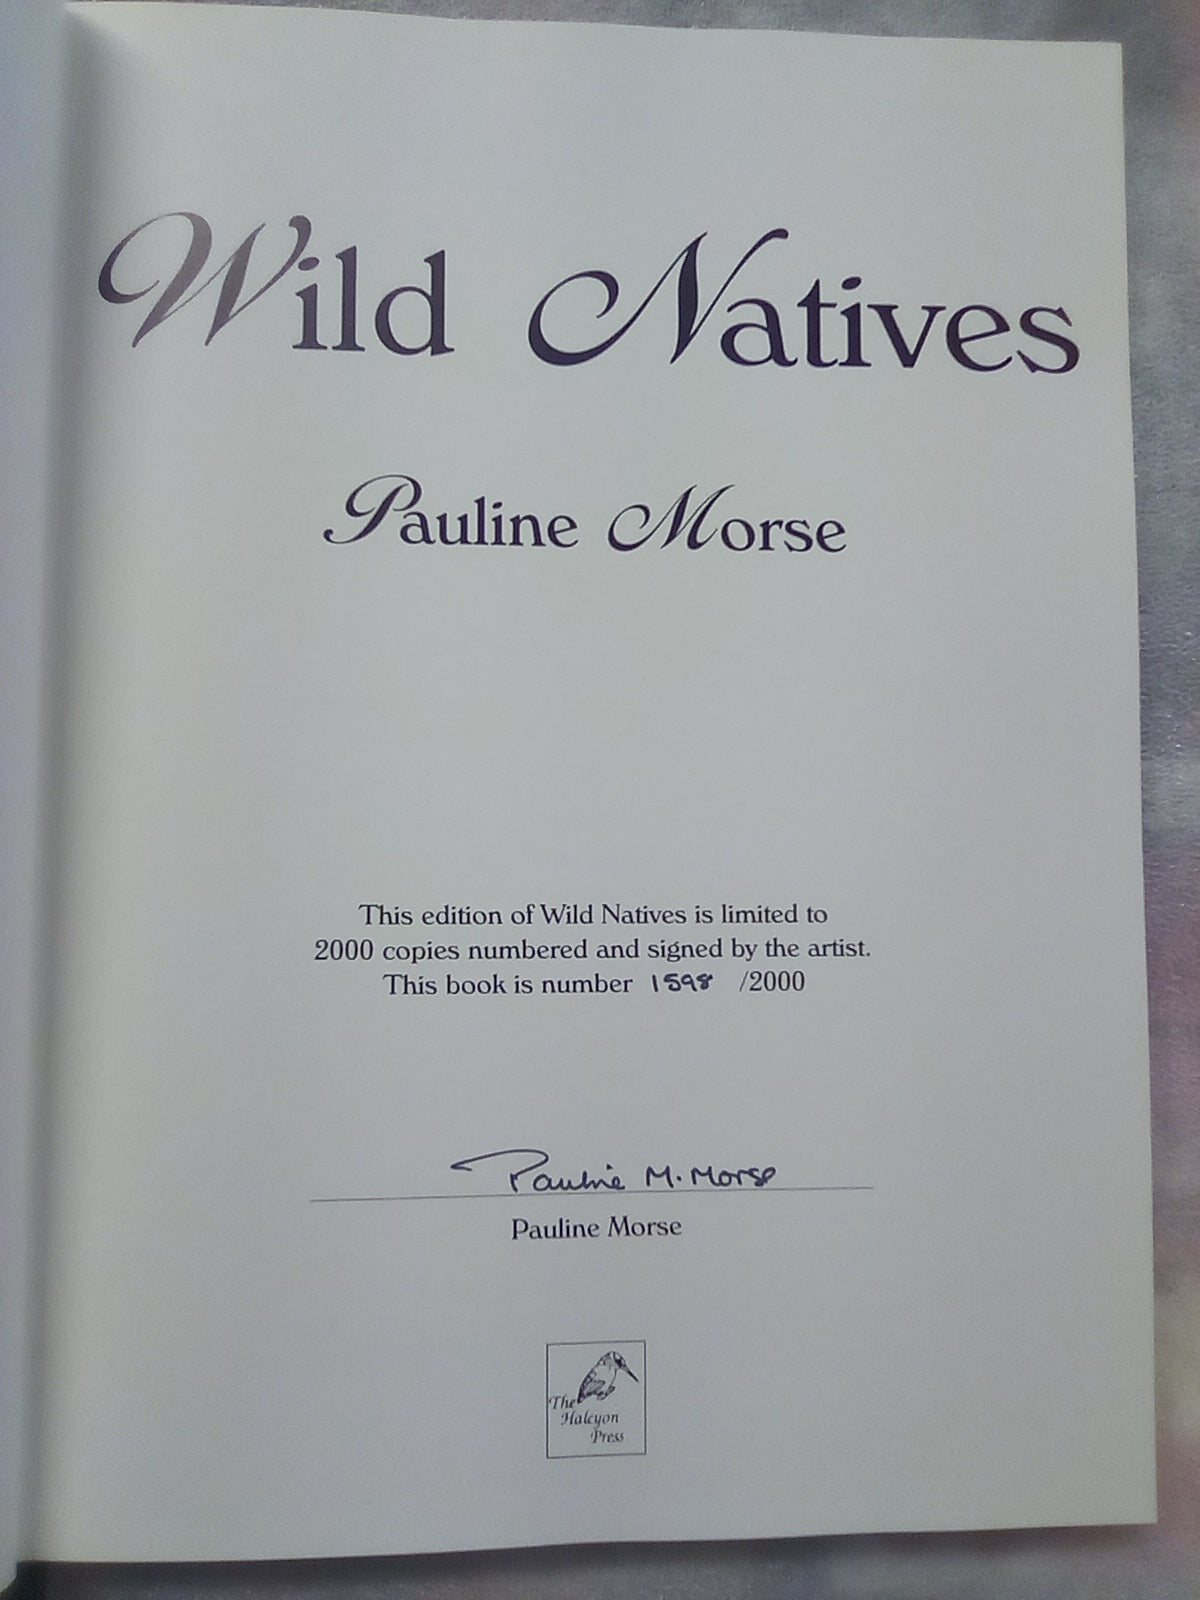 Wild Natives by Pauline Morse - Signed and Numbered Edition